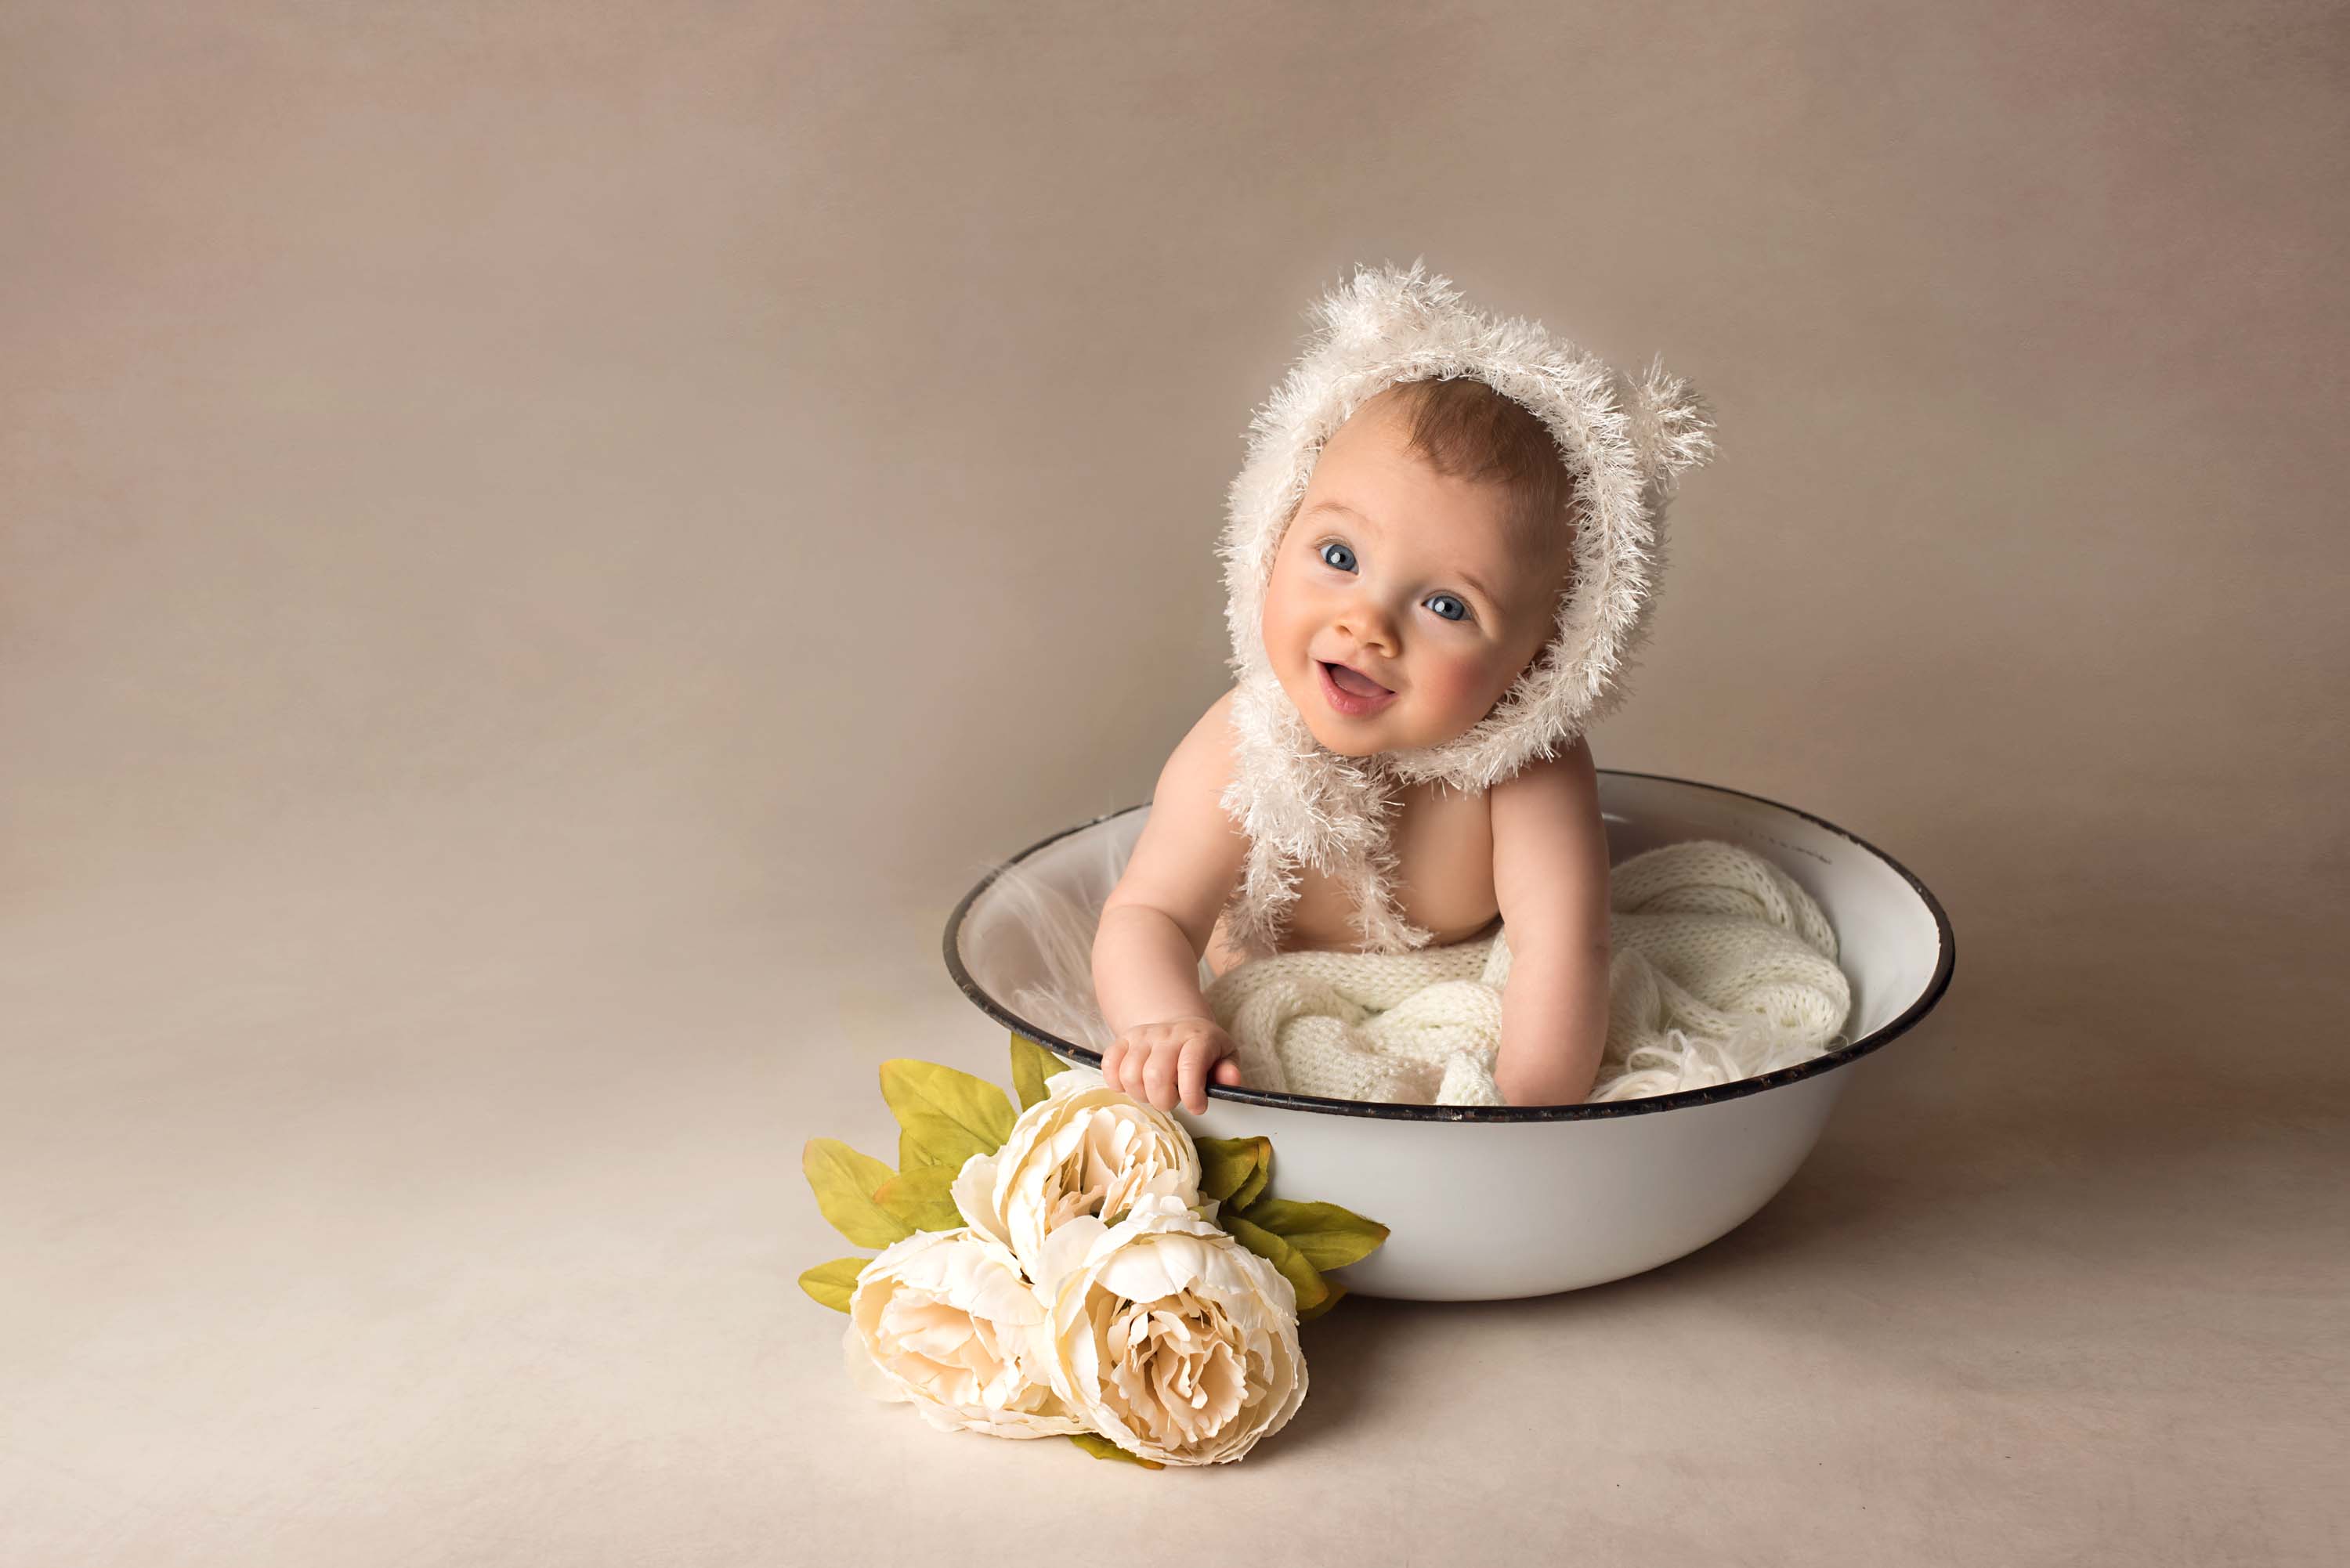 Baby girl with big blue eyes wearing bear hat and sitting in a bowl